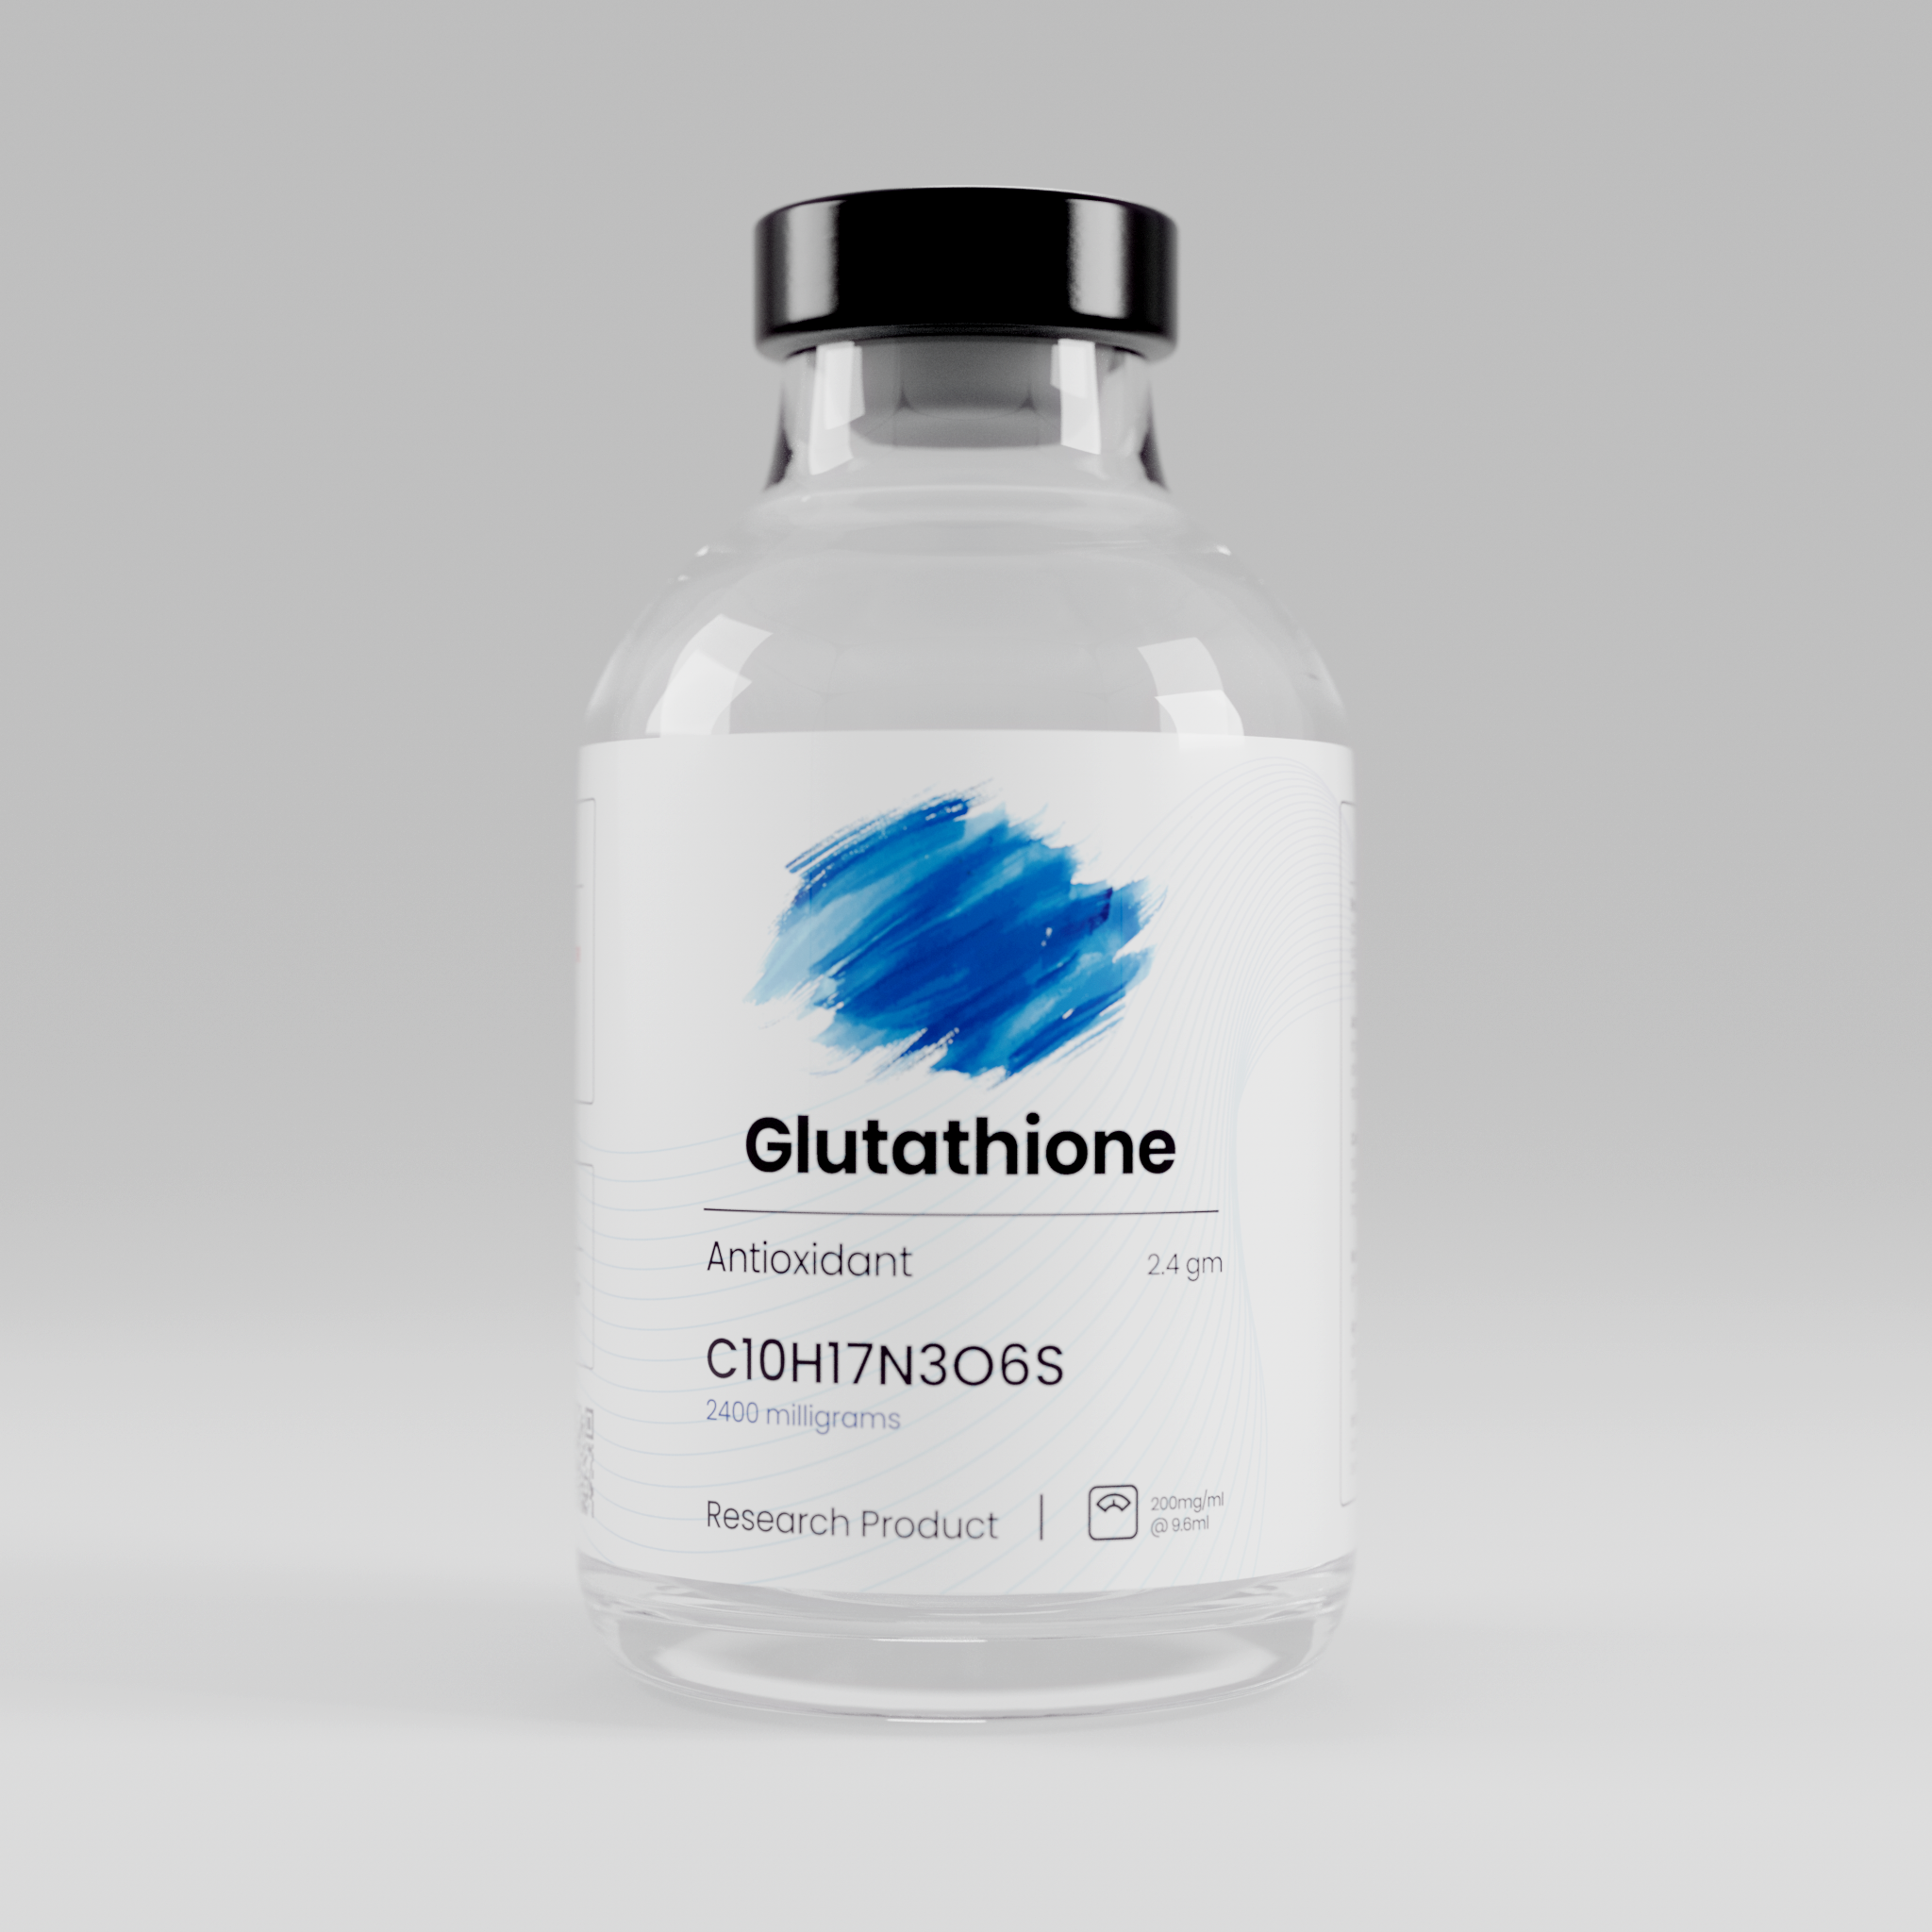 Gluthatione product image